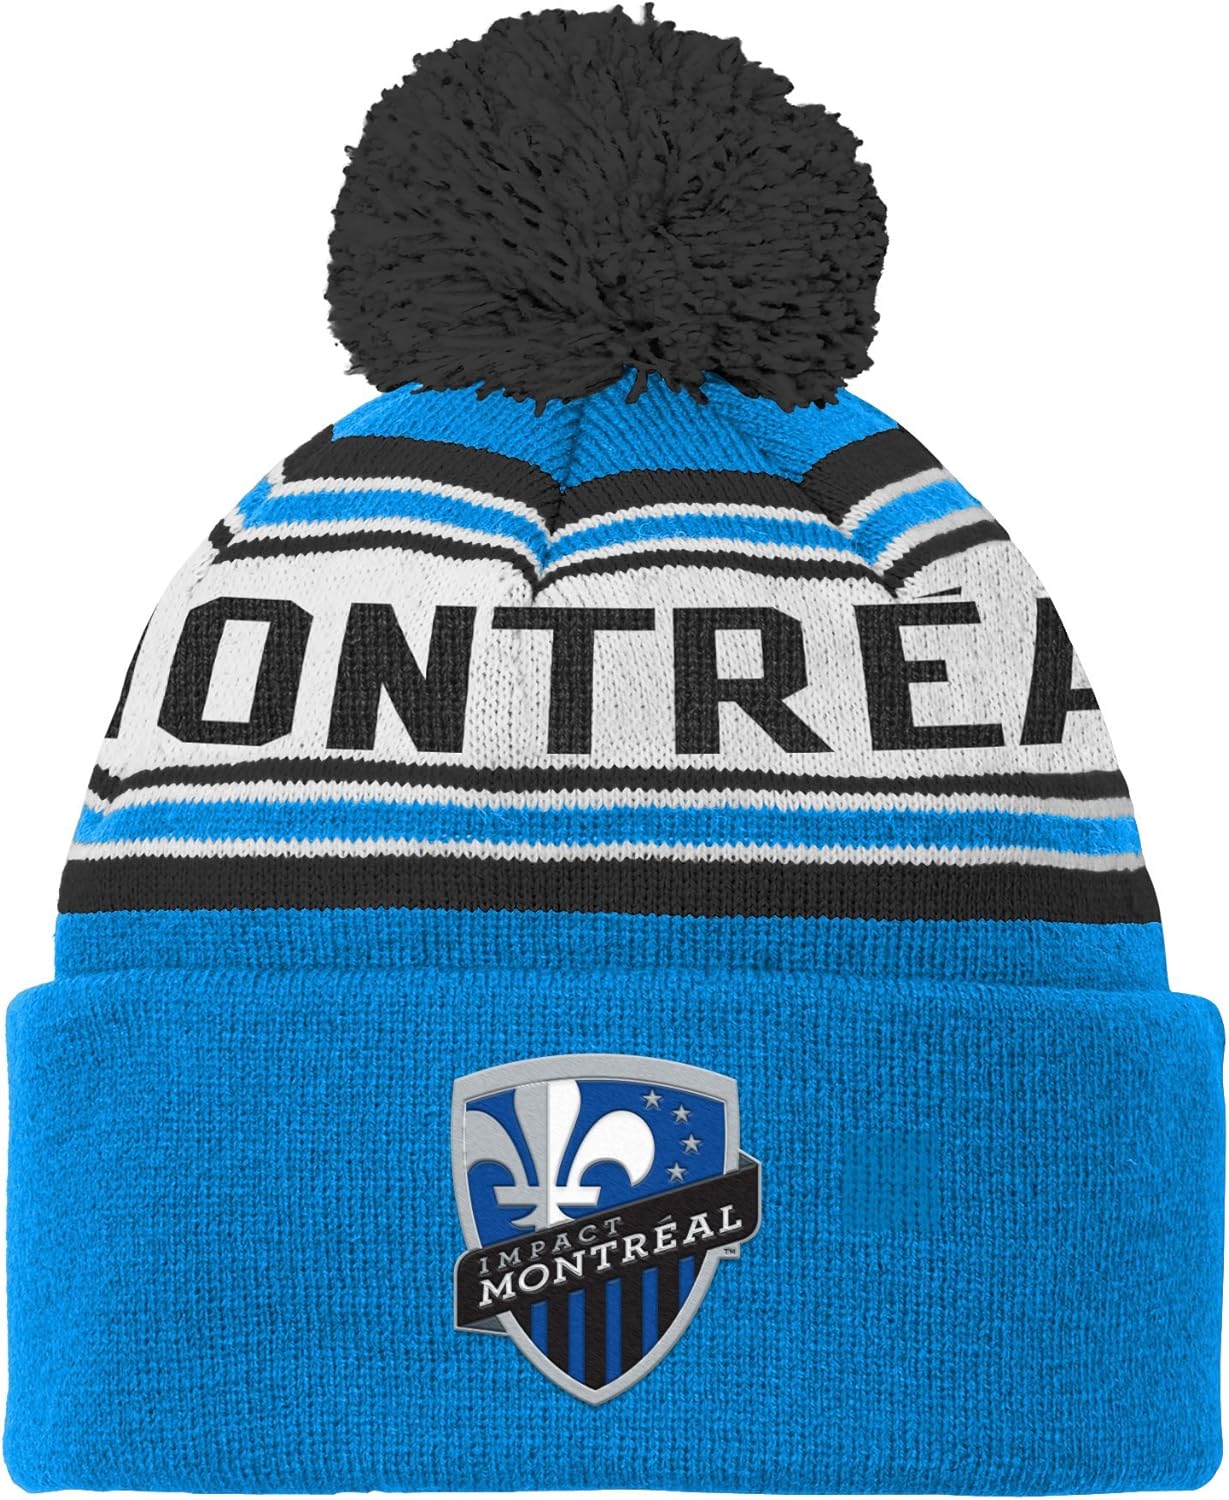 MLS by Outerstuff Boys' Cuffed Knit Hat with Pom